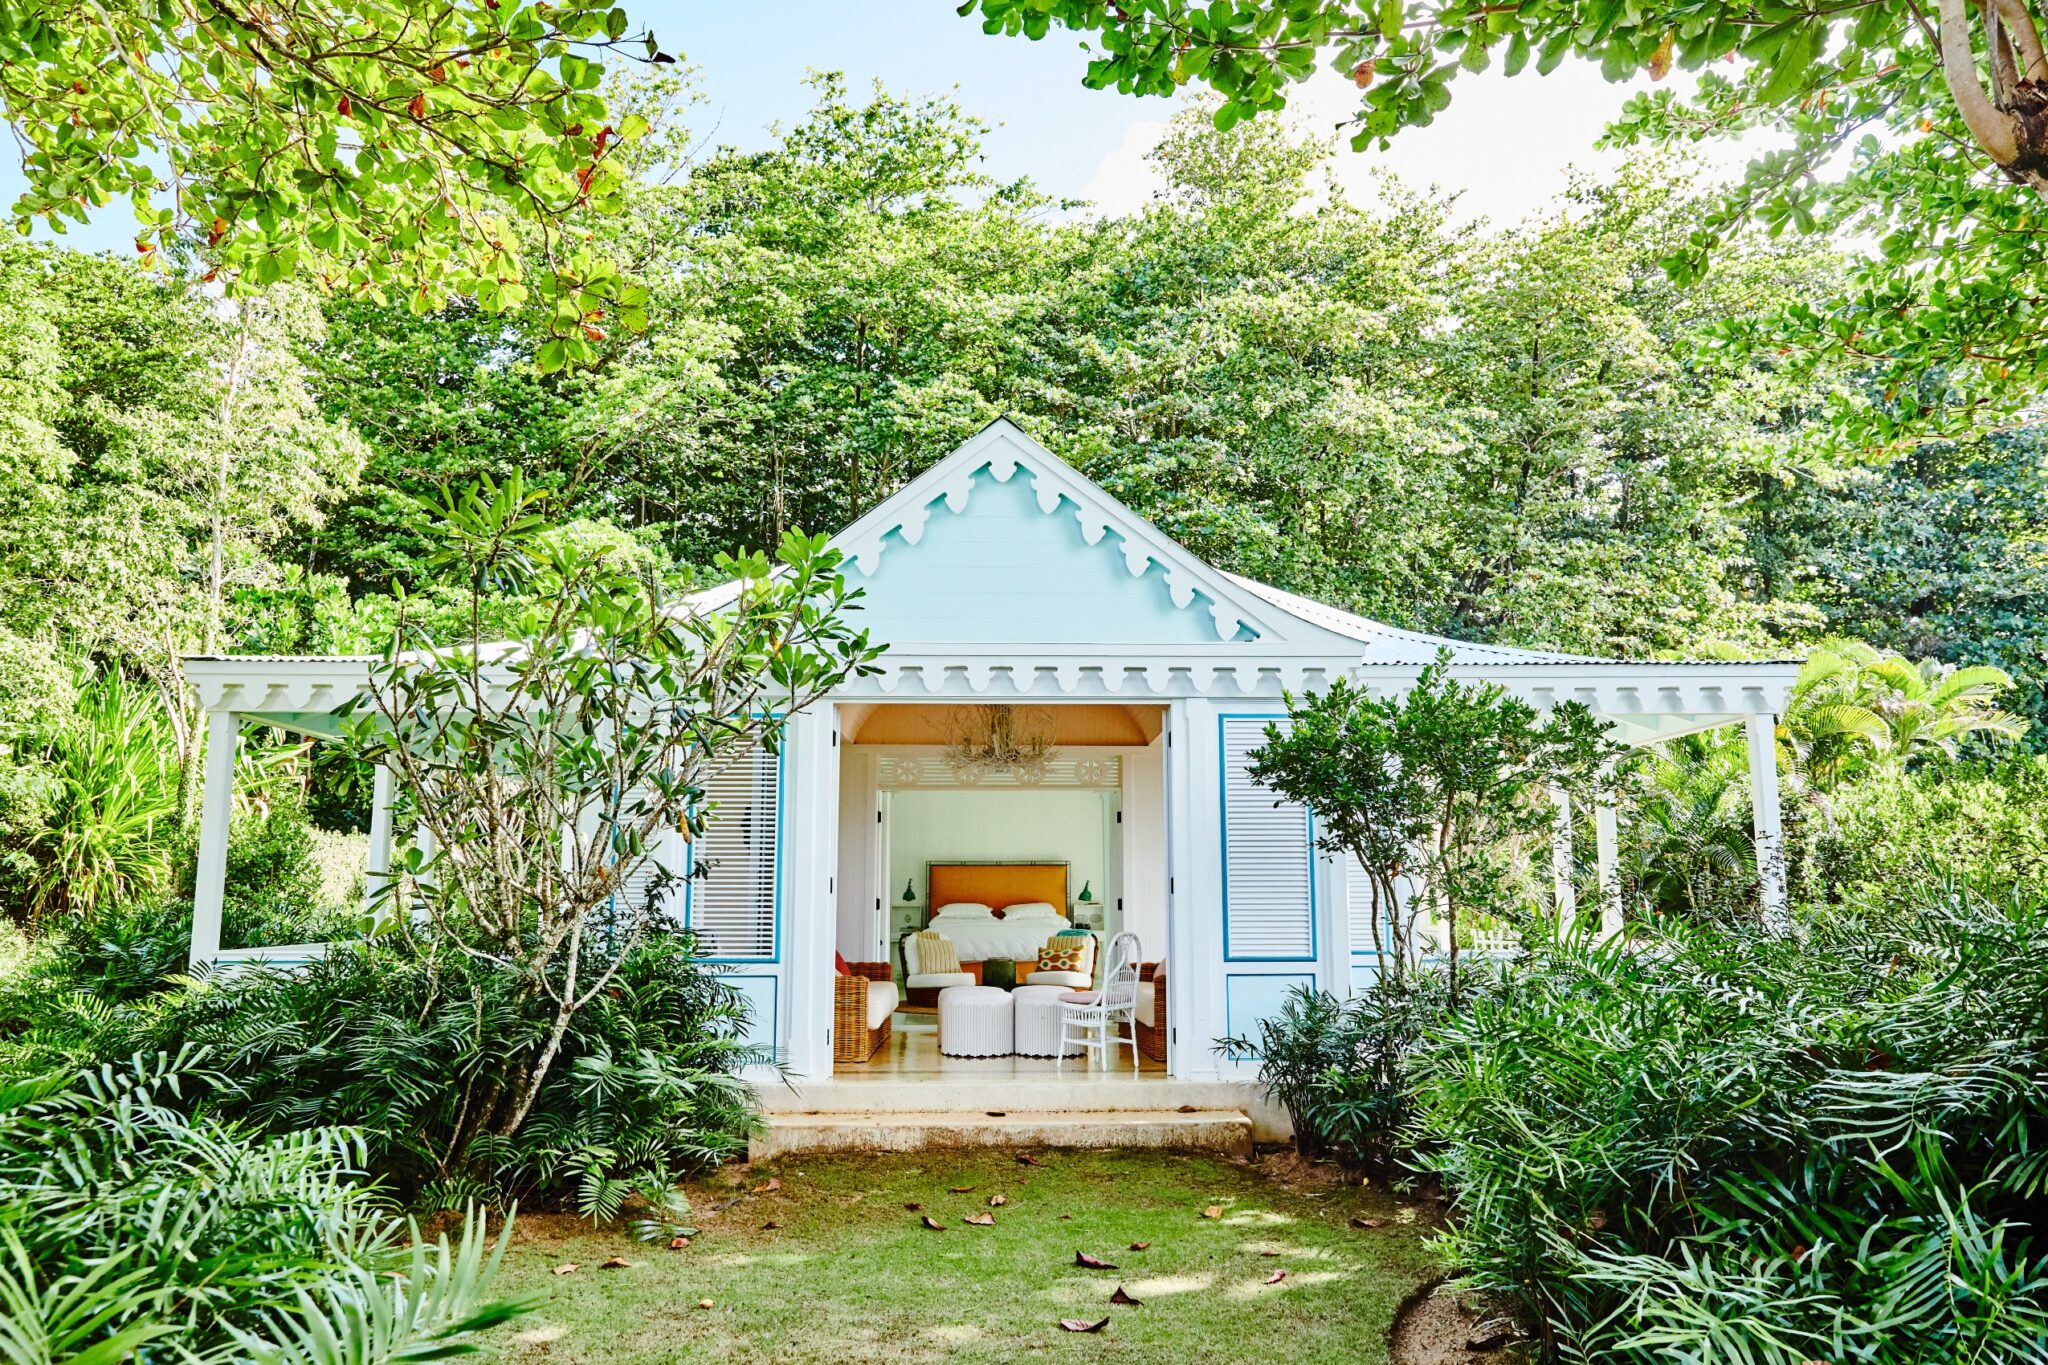 This Charming Caribbean Boutique Hotel Is One of the Region’s Best-Kept Secrets